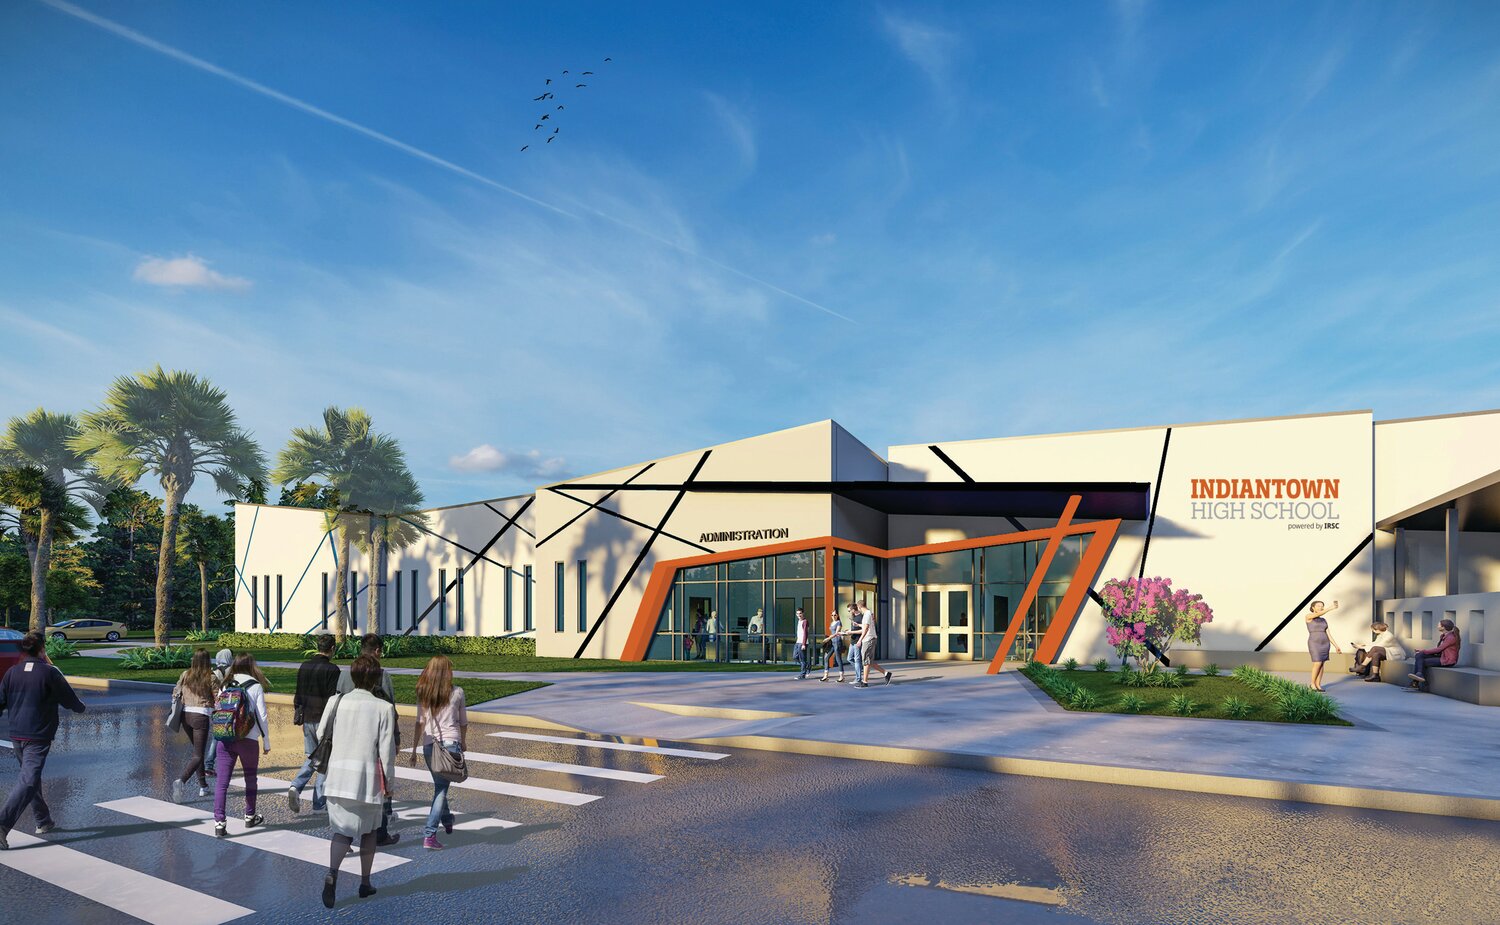 Rendering of Indiantown High School (IHS), Martin County’s newest charter high school. IHS is operated by Indian River State College (IRSC) in partnership with the Martin County School District. The school integrates traditional high school curriculum with workforce and college courses, producing graduates that can directly pursue career opportunities or college upon graduation. Students interested in attending can find the application and information at indiantownhs.irsc.edu. Classes begin on August 9.